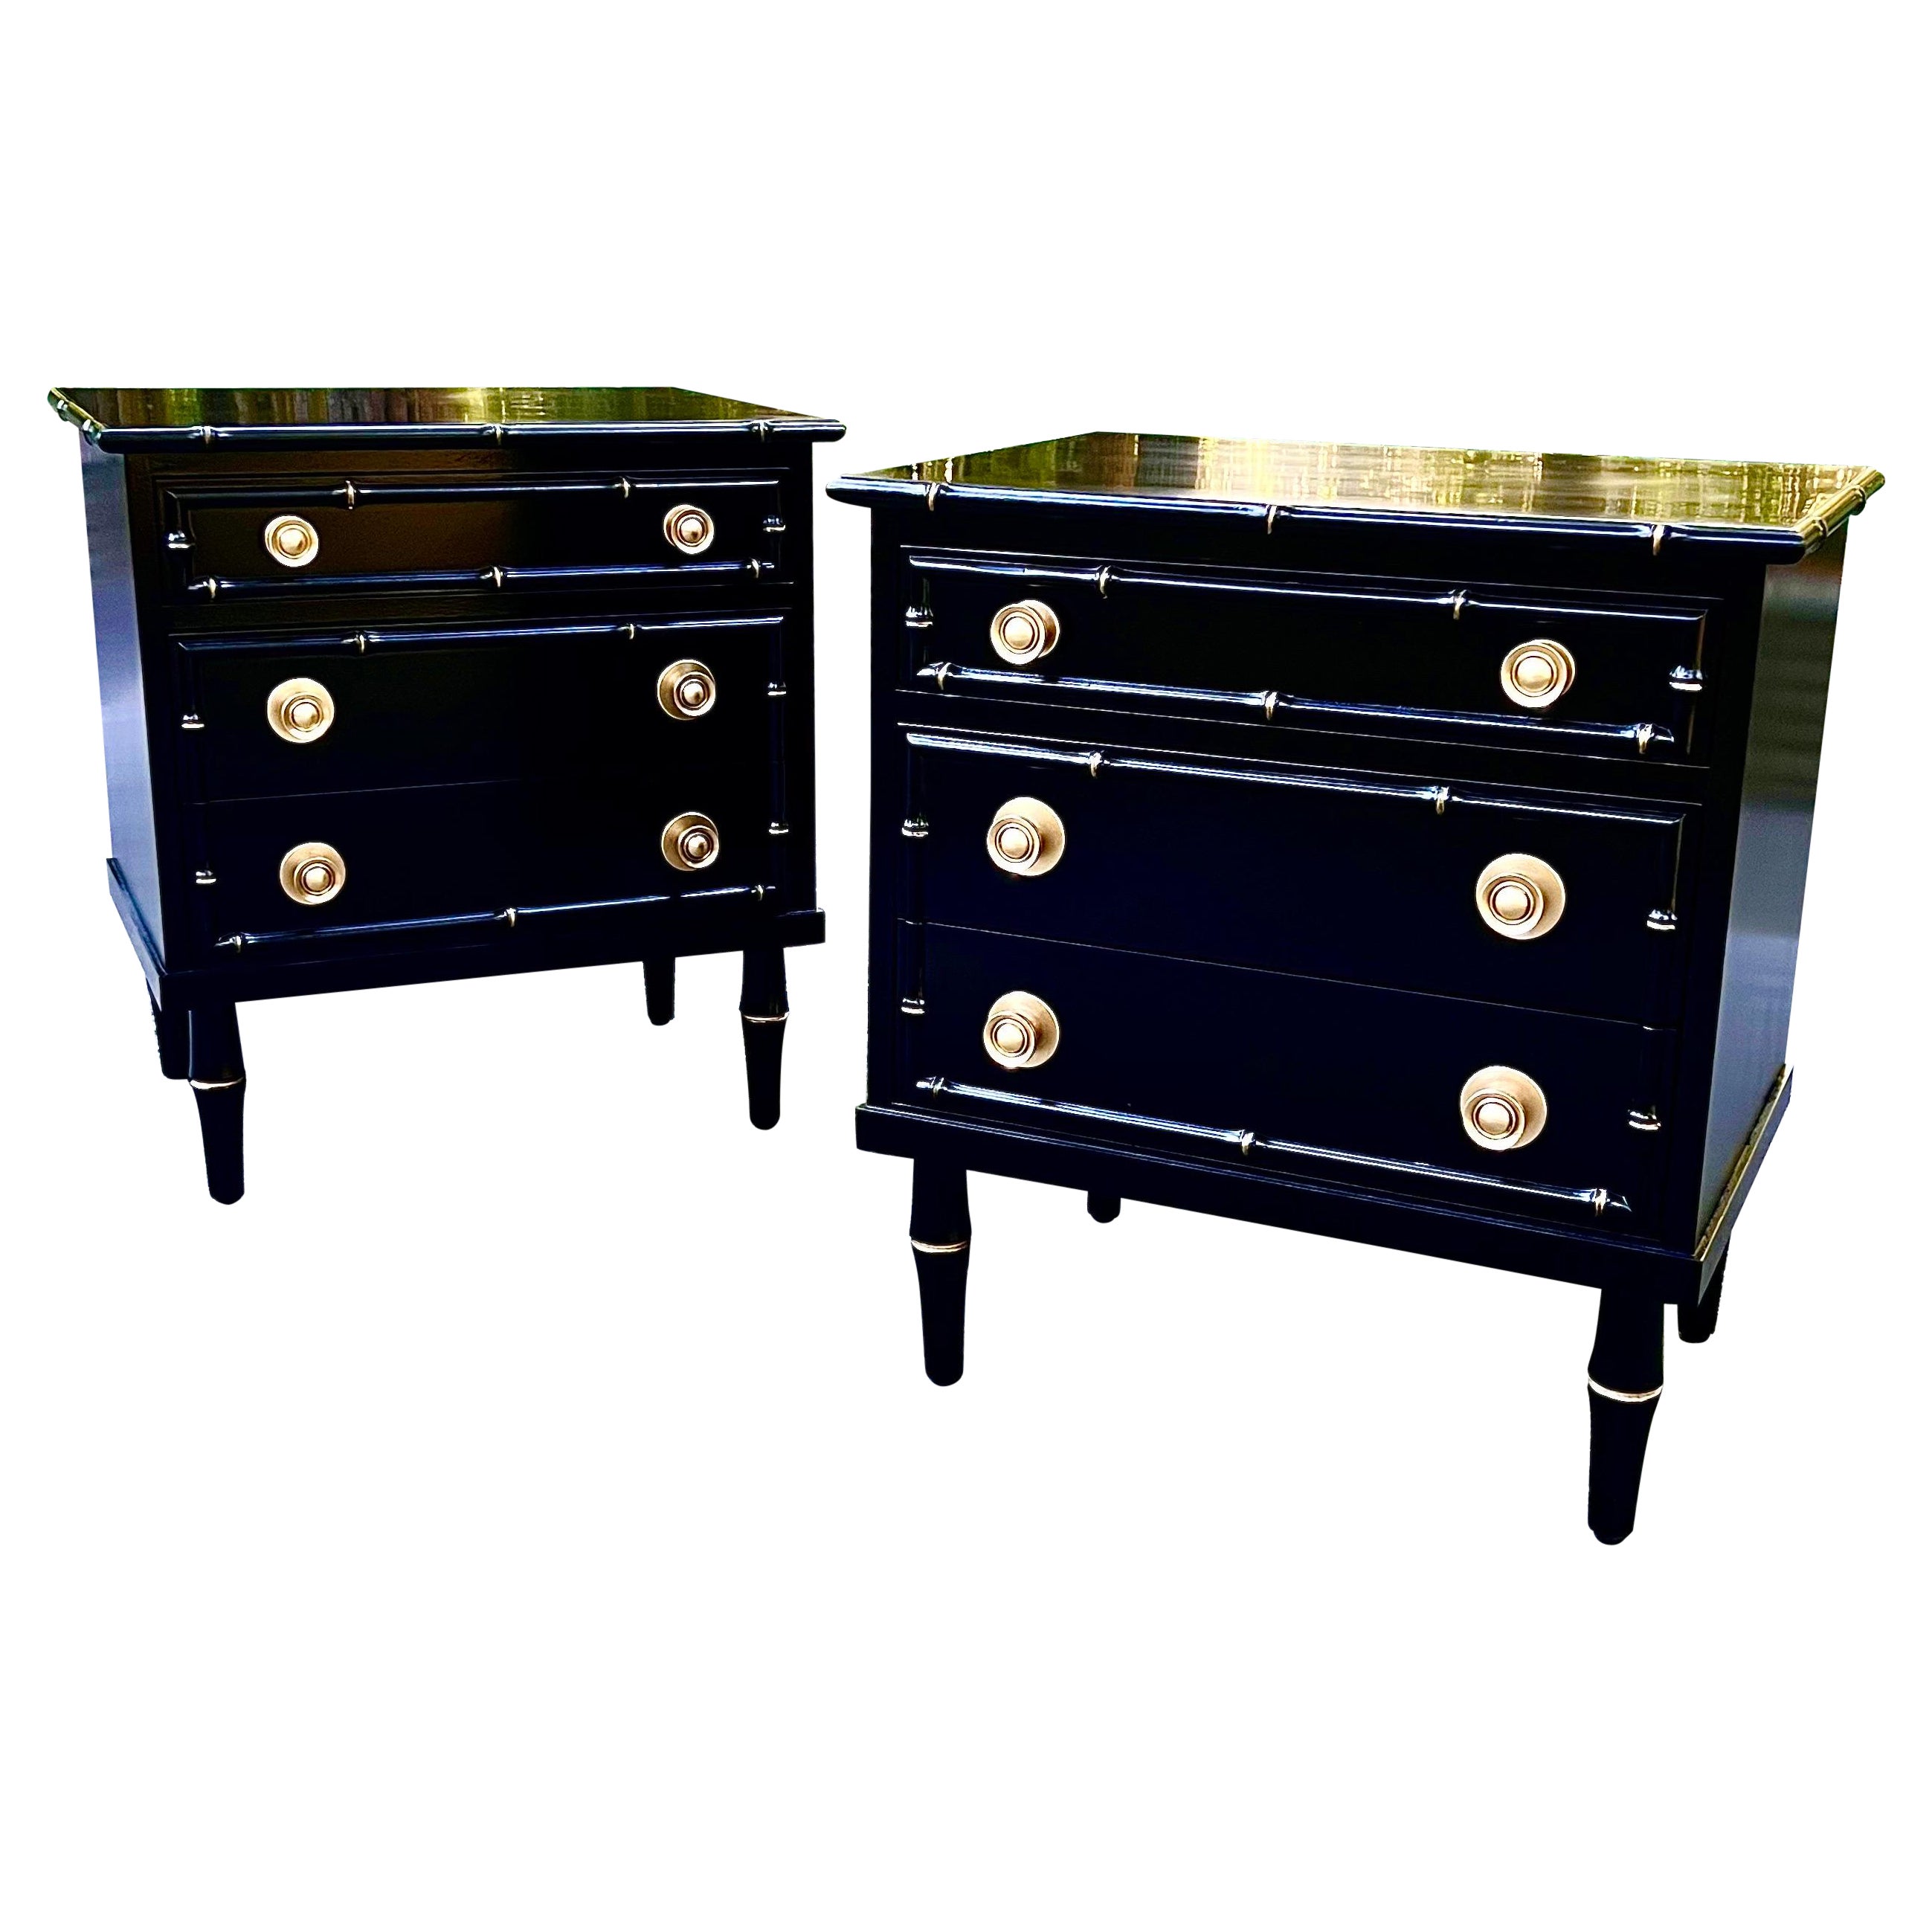 Elegant Pair of Black Lacquer and Brass Small Chests by Ficks Reed, circa 1960